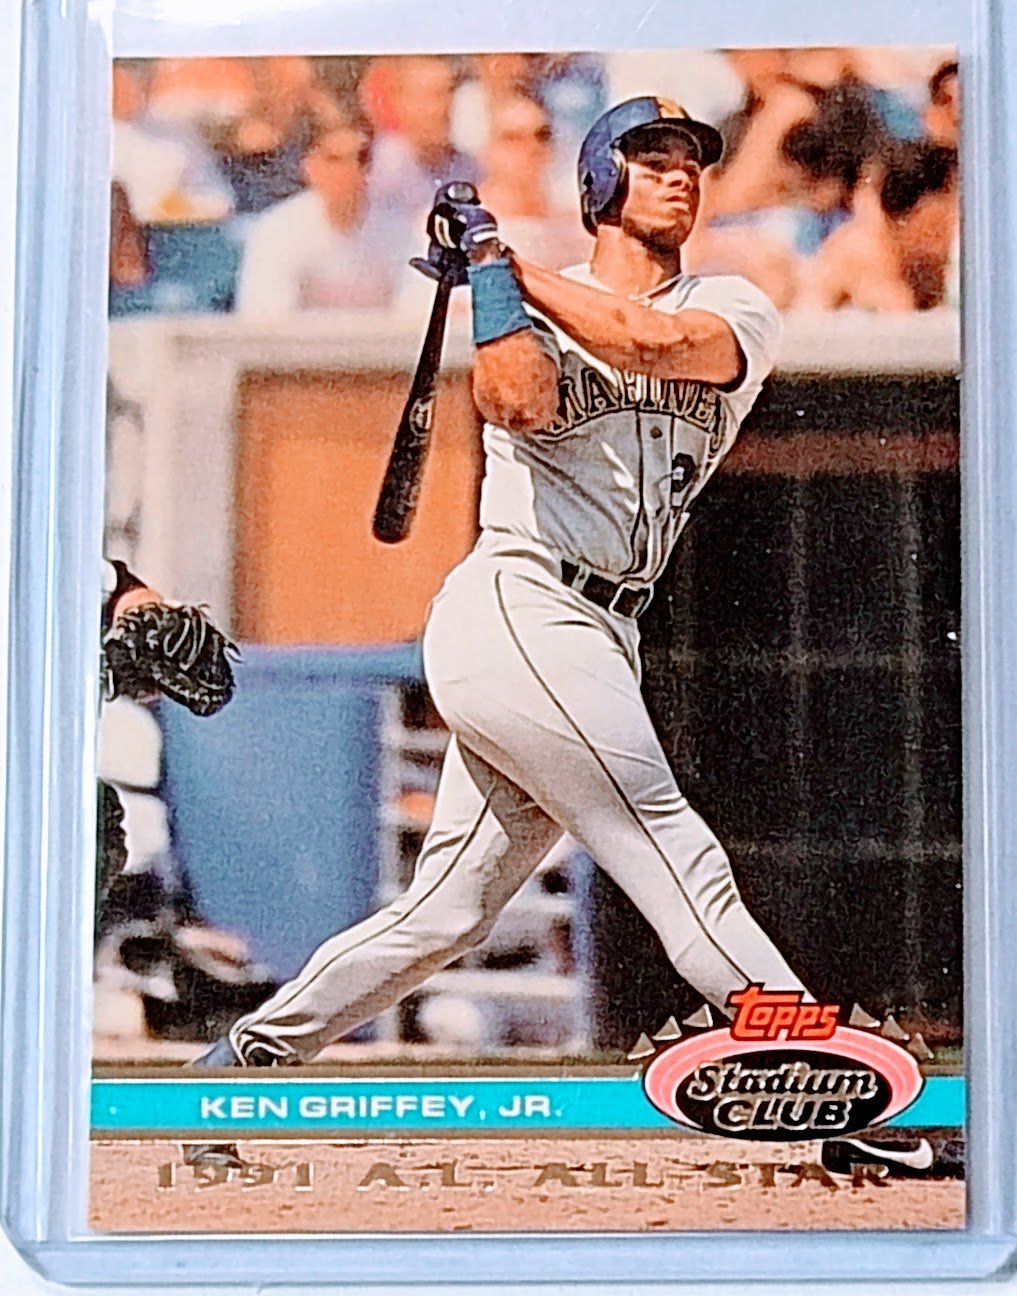 1992 Topps Stadium Club Dome Ken Griffey Jr 1991 All Star MLB Baseball Trading Card TPTV simple Xclusive Collectibles   